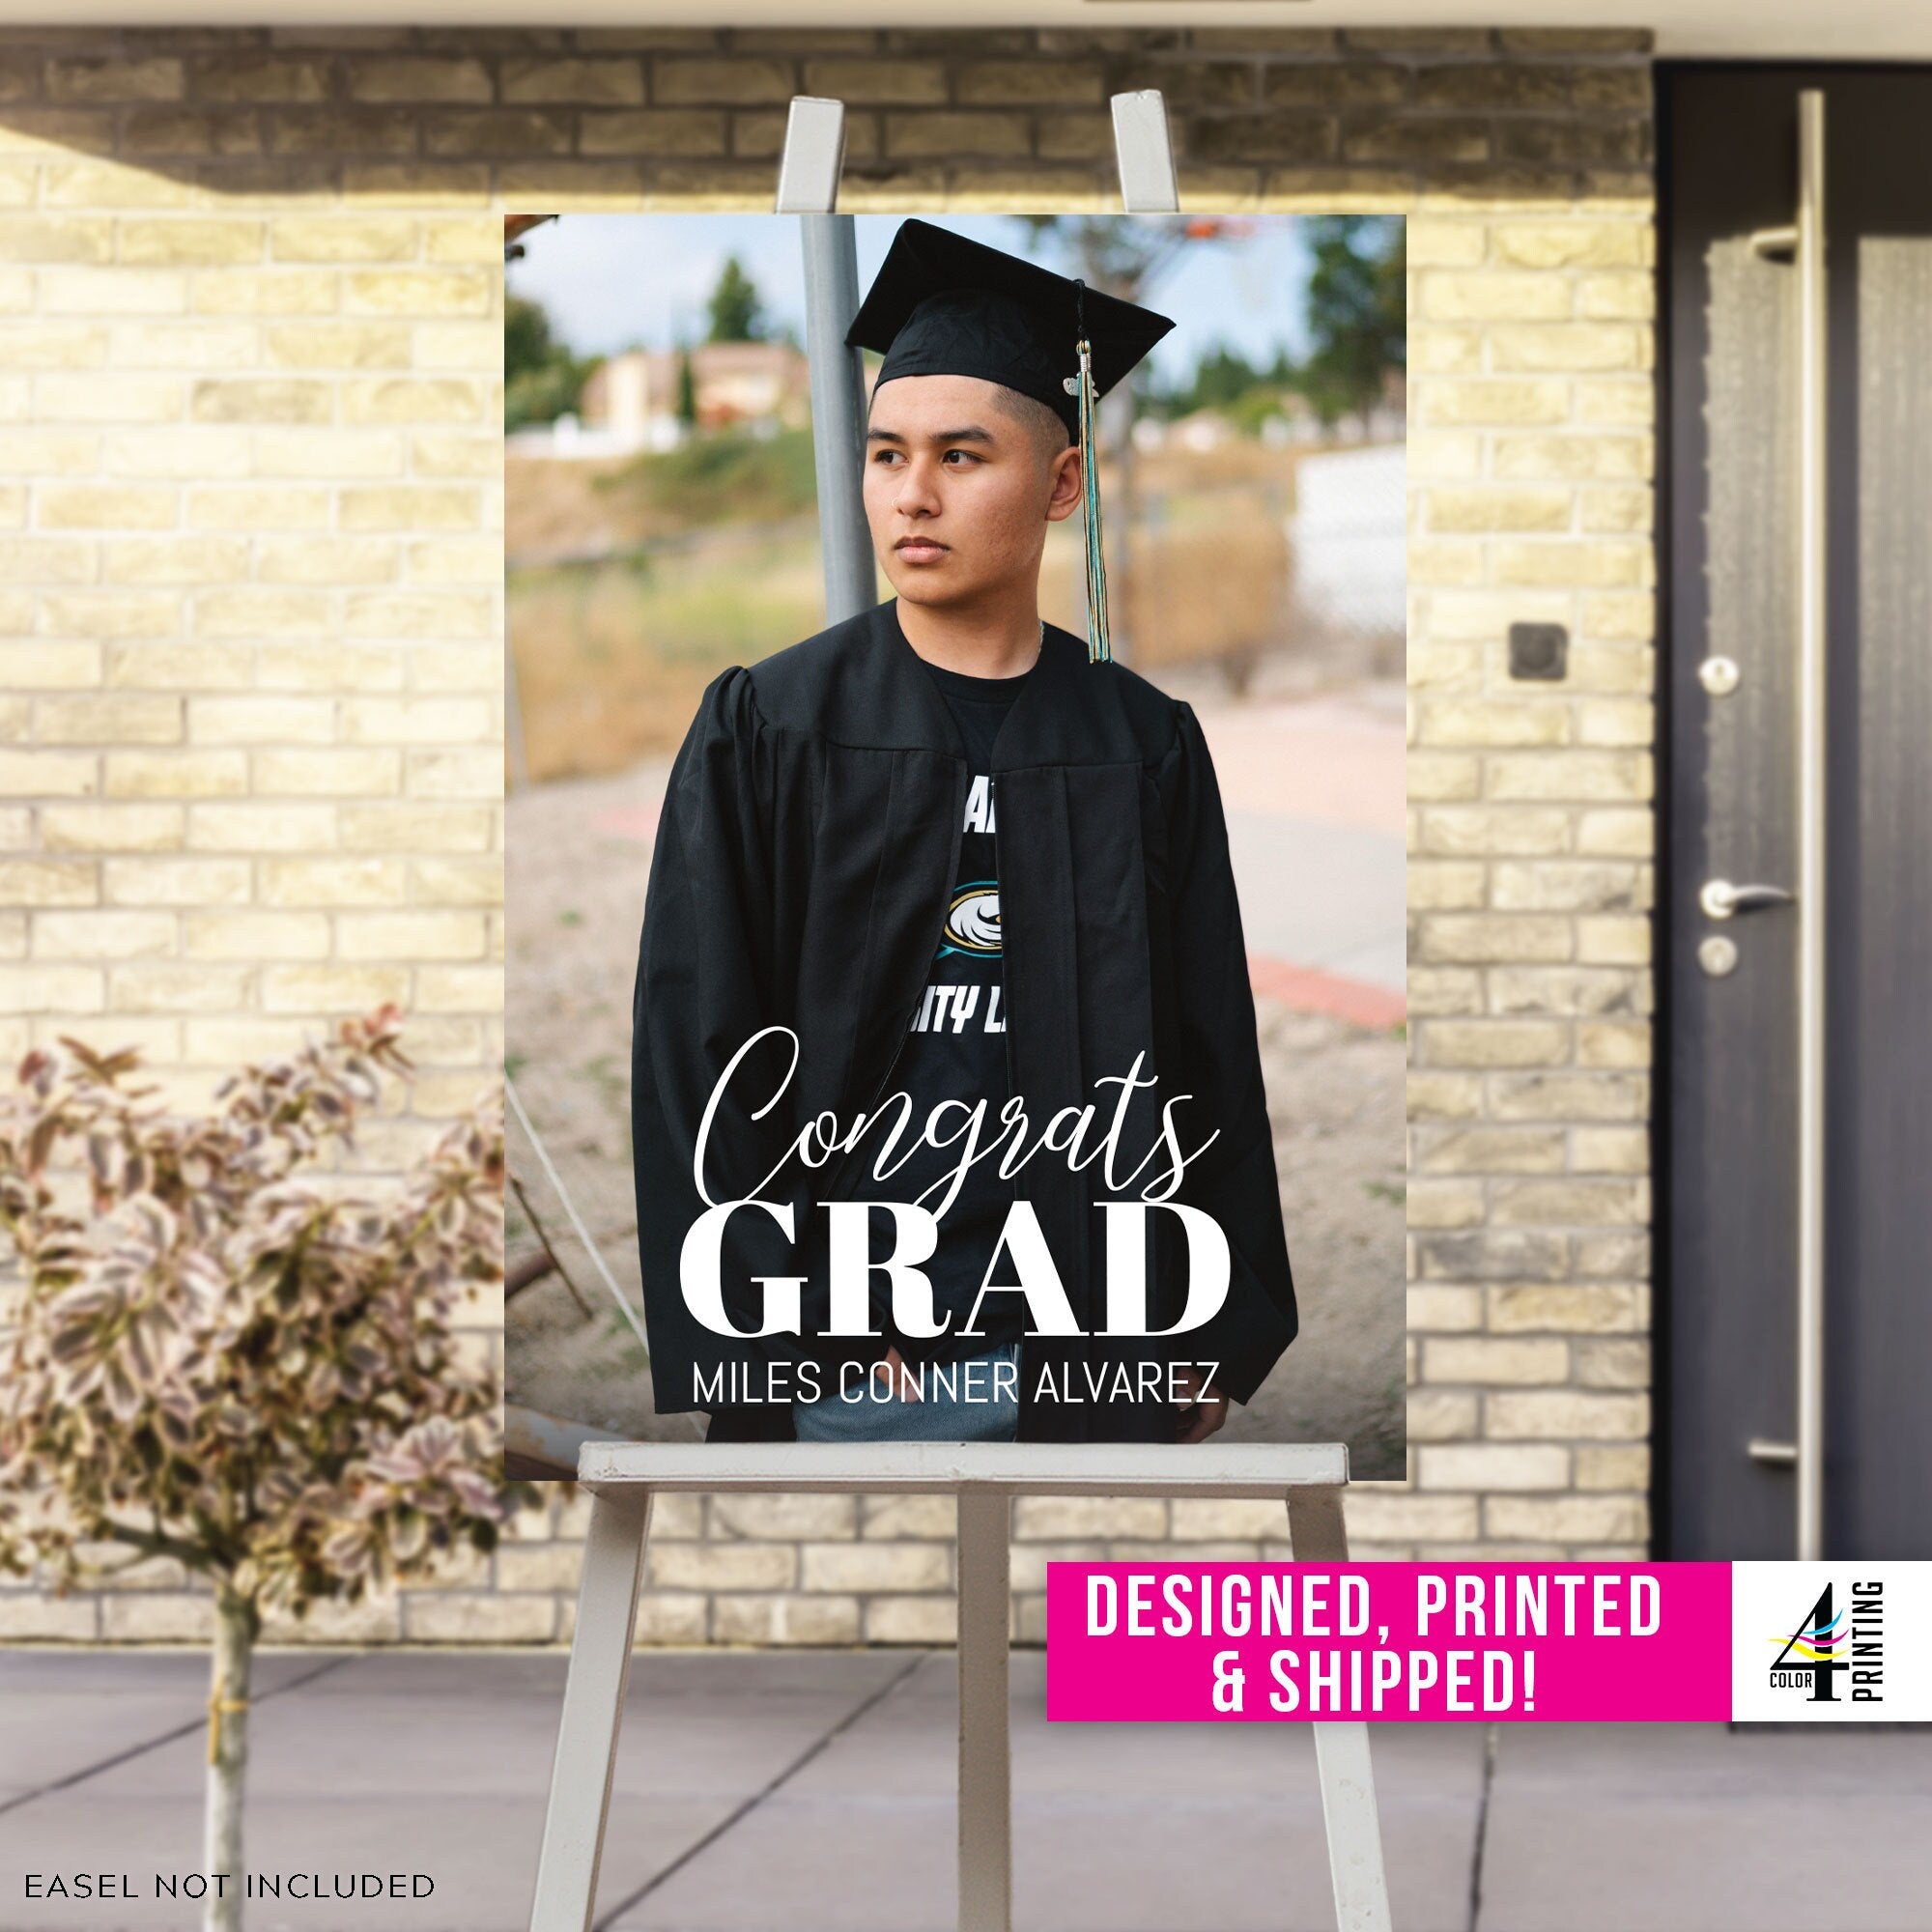 Congrats Grad Party Sign with Photo. Printed and shipped to you.